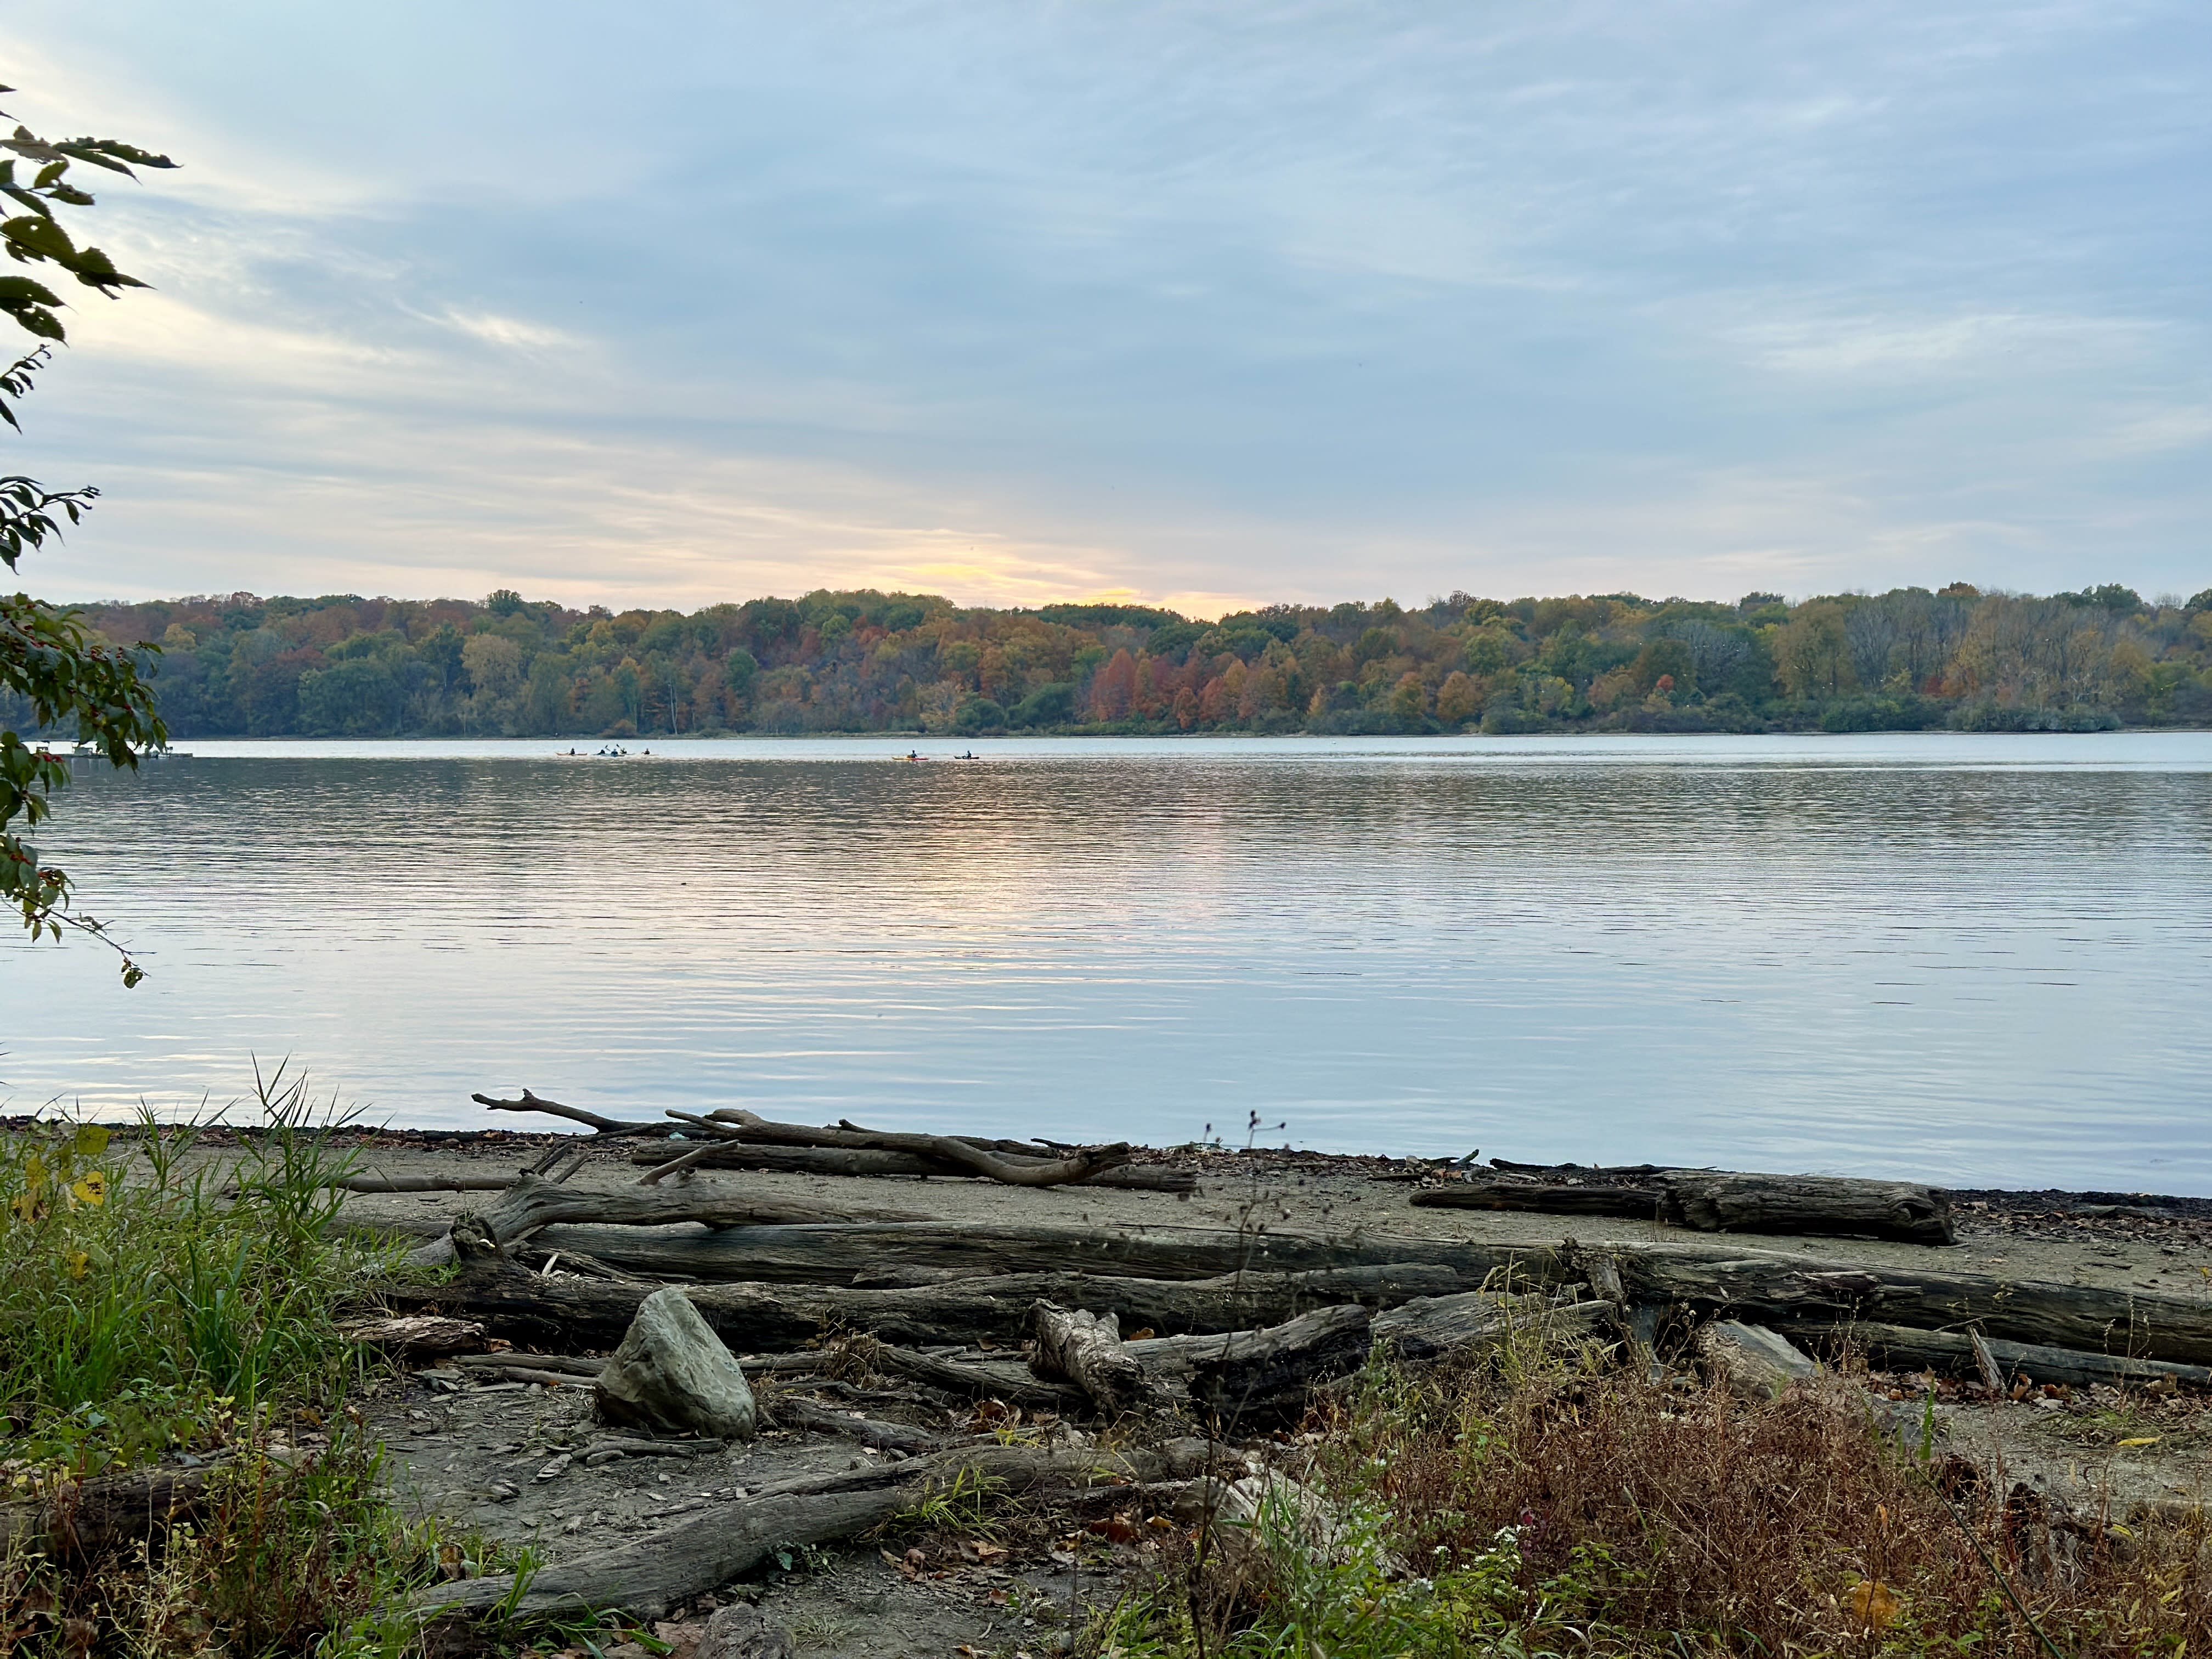 Nature Exploration is Located Just Minutes From Downtown at Indy's Eagle  Creek Park